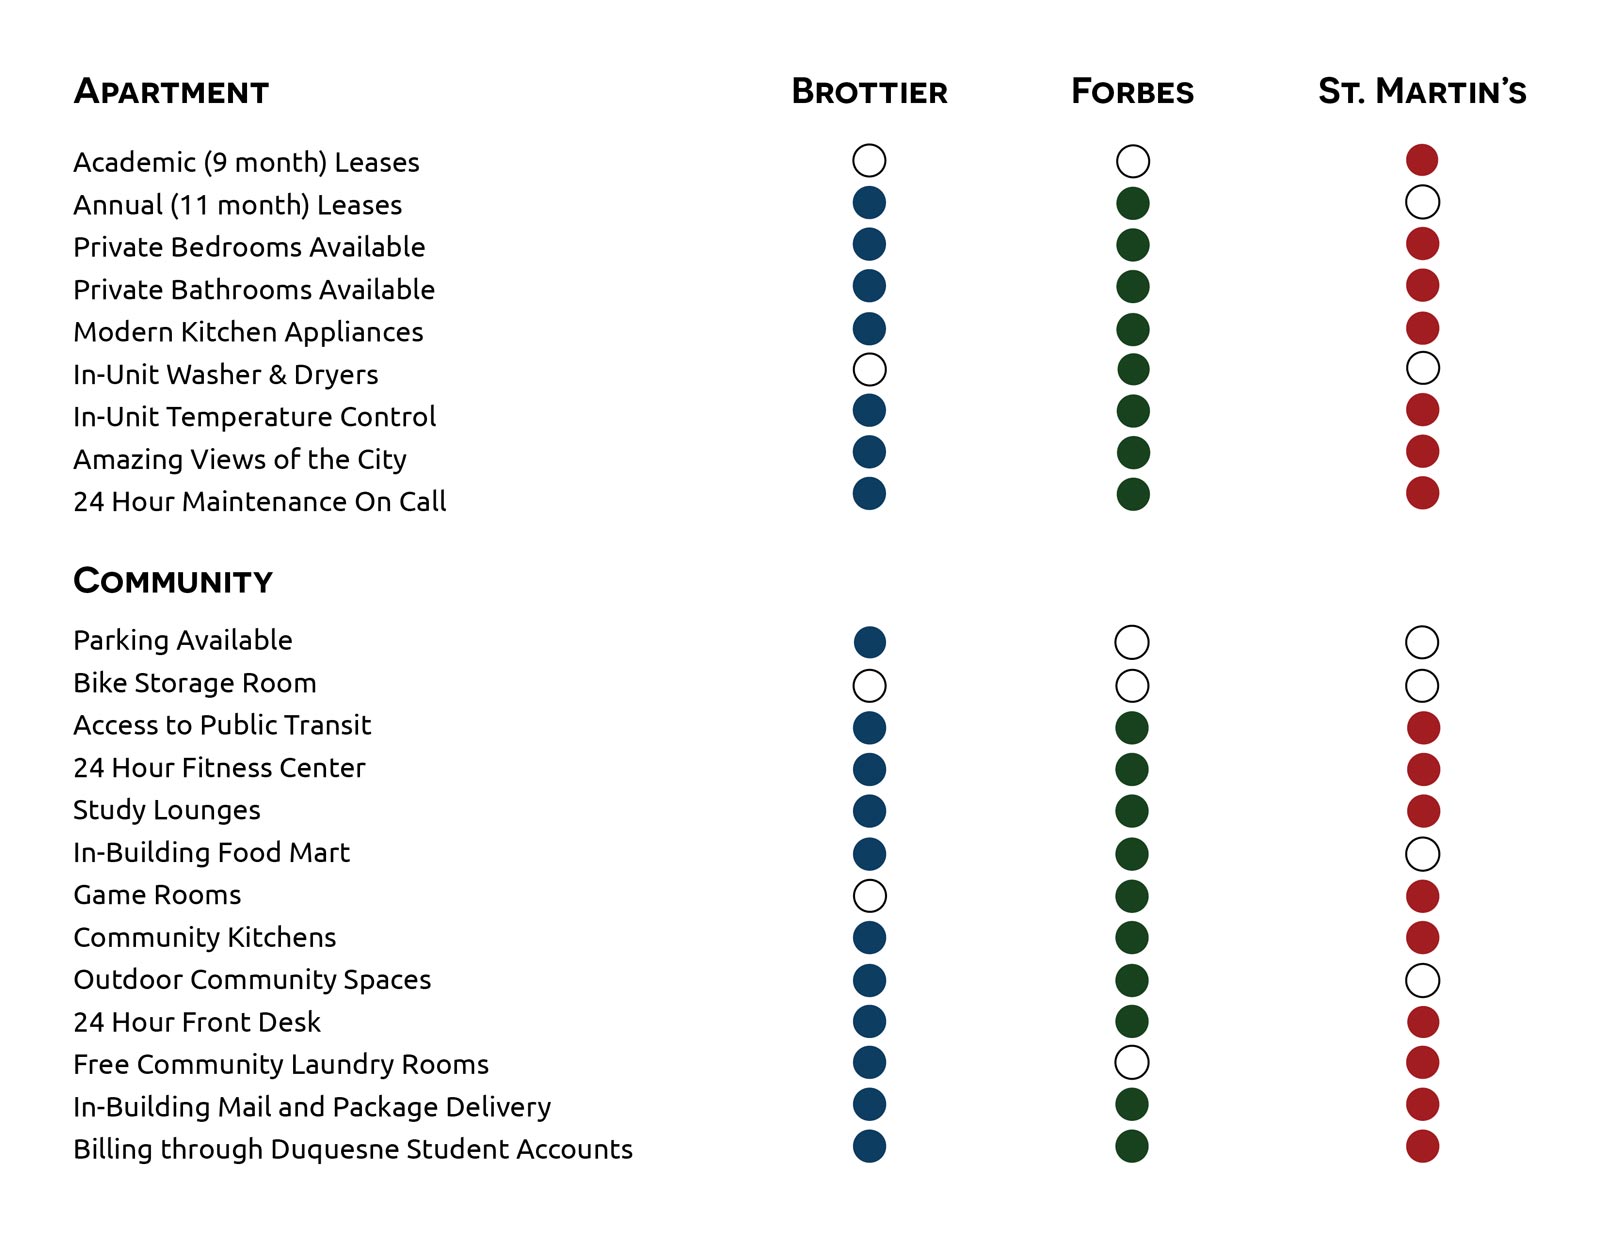 Compare Properties Graphic